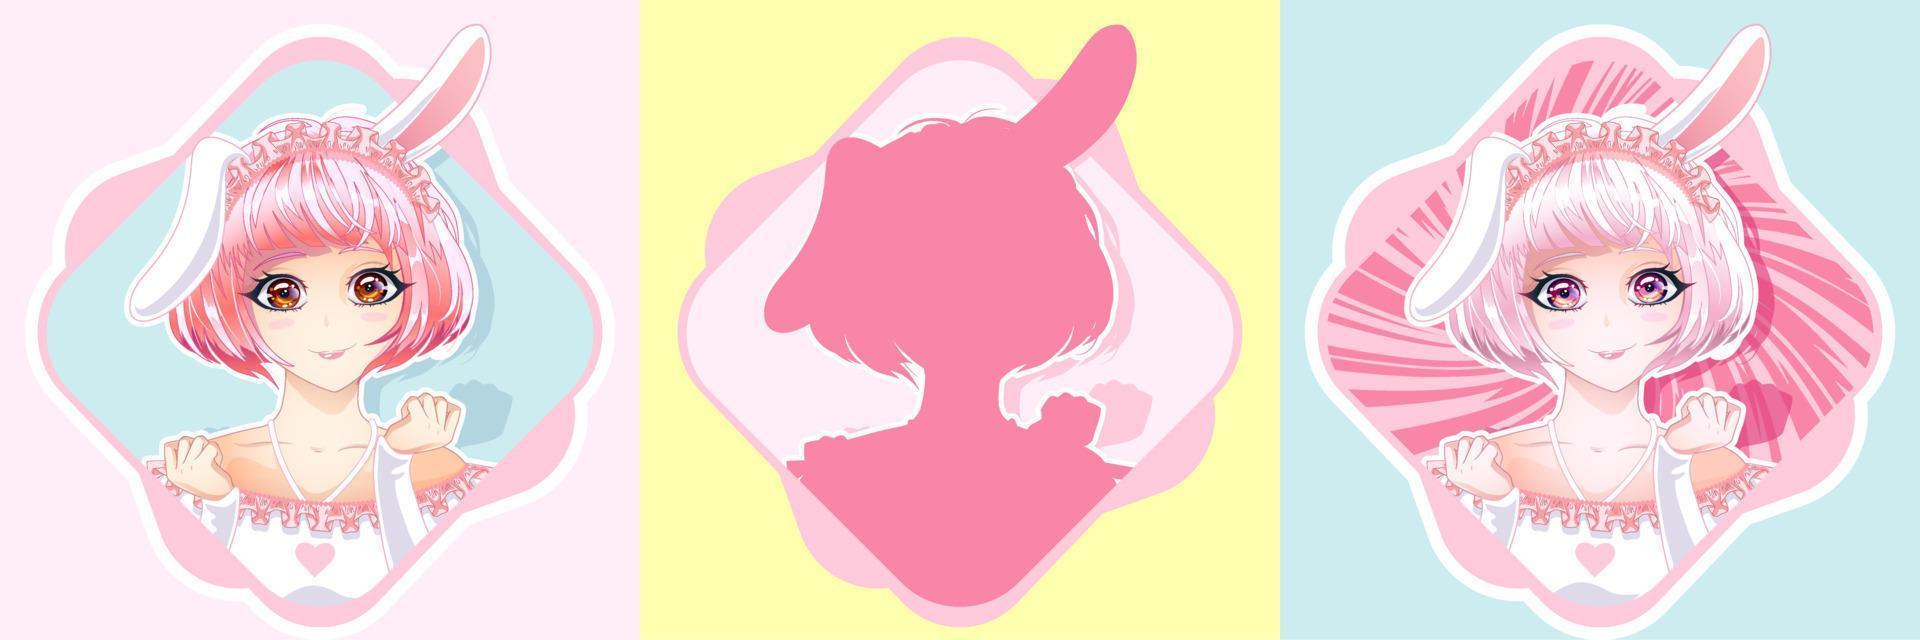 Cute girl portrait with pink hair and bunny ears. vector